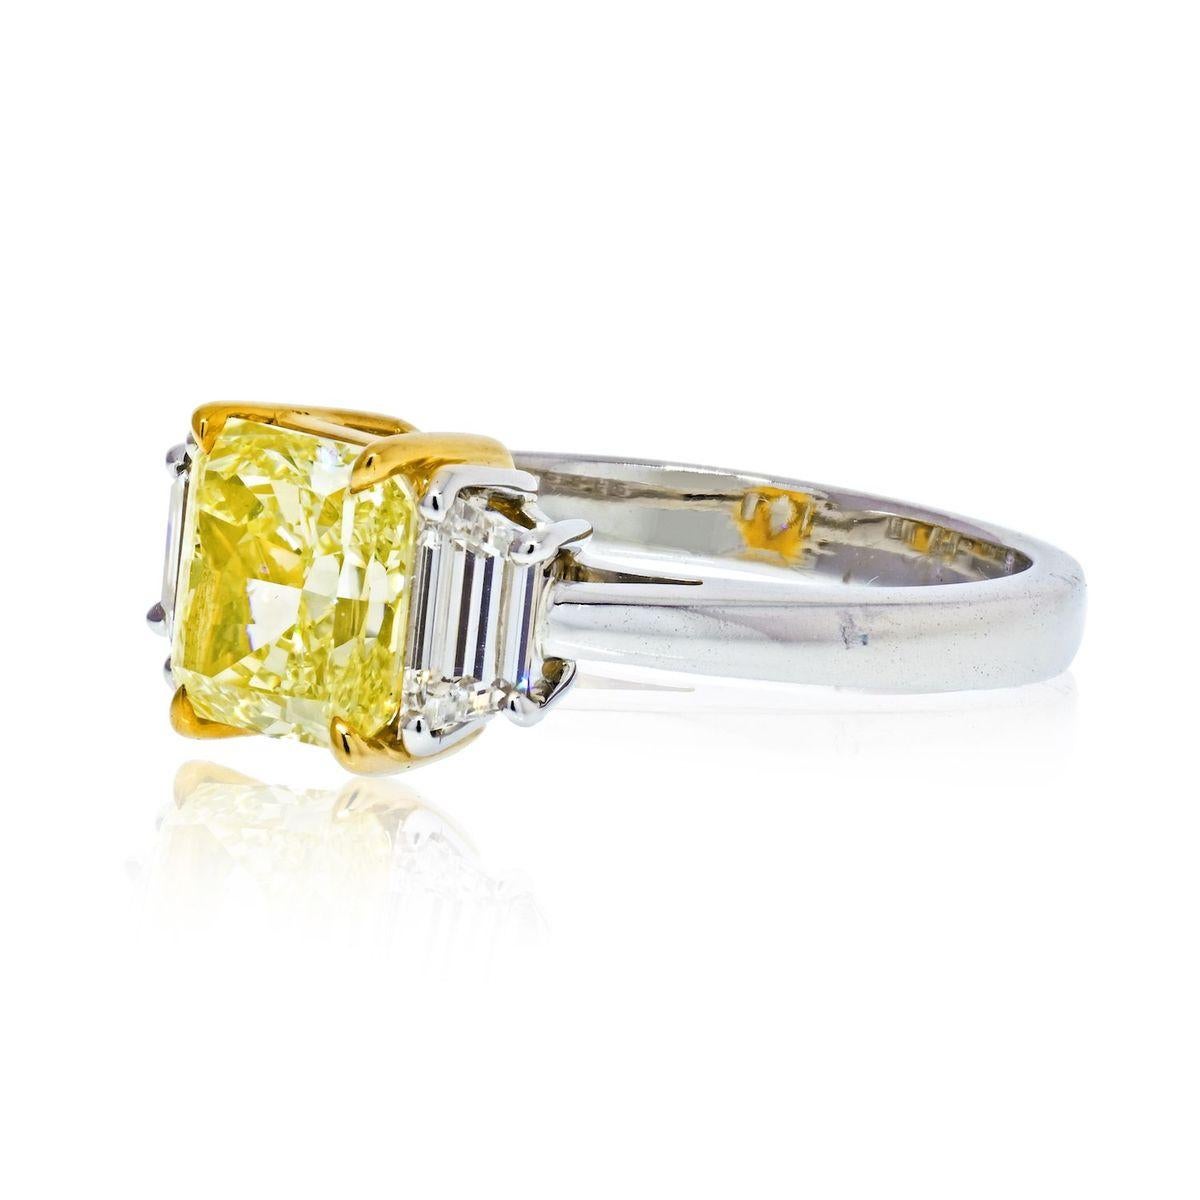 Set with a cut-cornered rectangular modified brilliant-cut Fancy Yellow diamond, between trapezoid diamond shoulders. Fancy Yellow diamond weighing 2.13 carats. Trapezoid diamonds weighing a total of 0.62 carat. Accompanied by GIA report 16312352